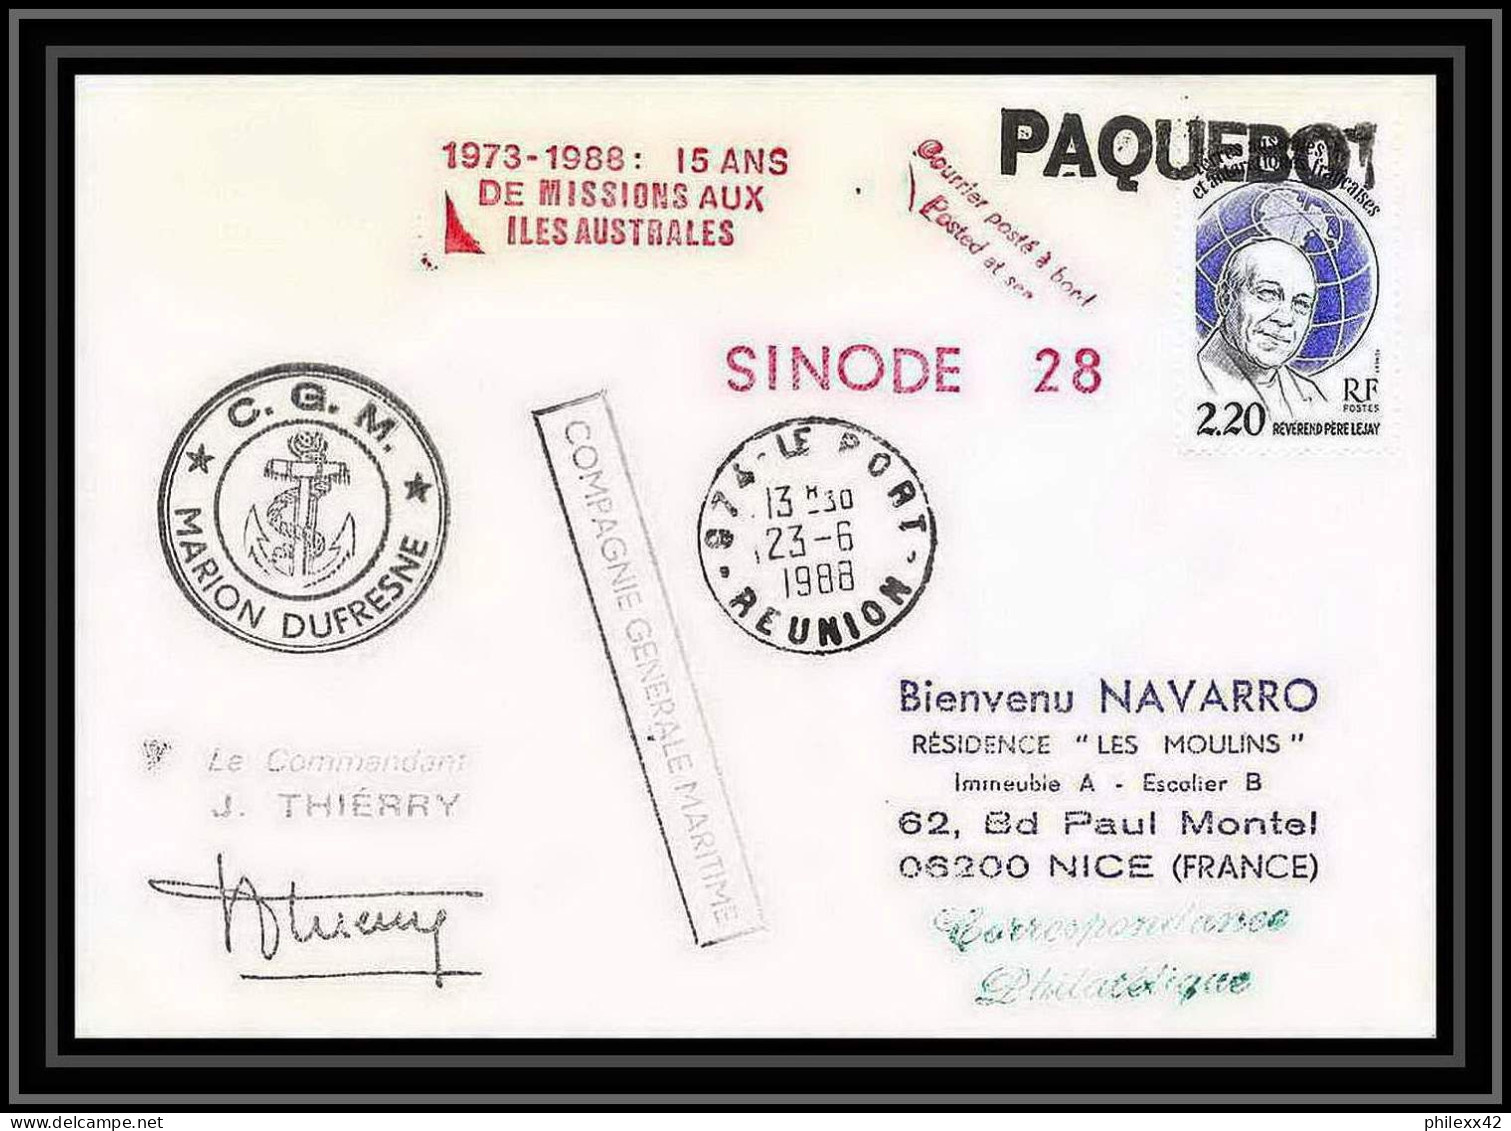 1561 Campagne Sinode 28 Marion Dufresne1988 Signé Signed Thierry TAAF Antarctic Terres Australes Lettre (cover) Paquebot - Expediciones Antárticas